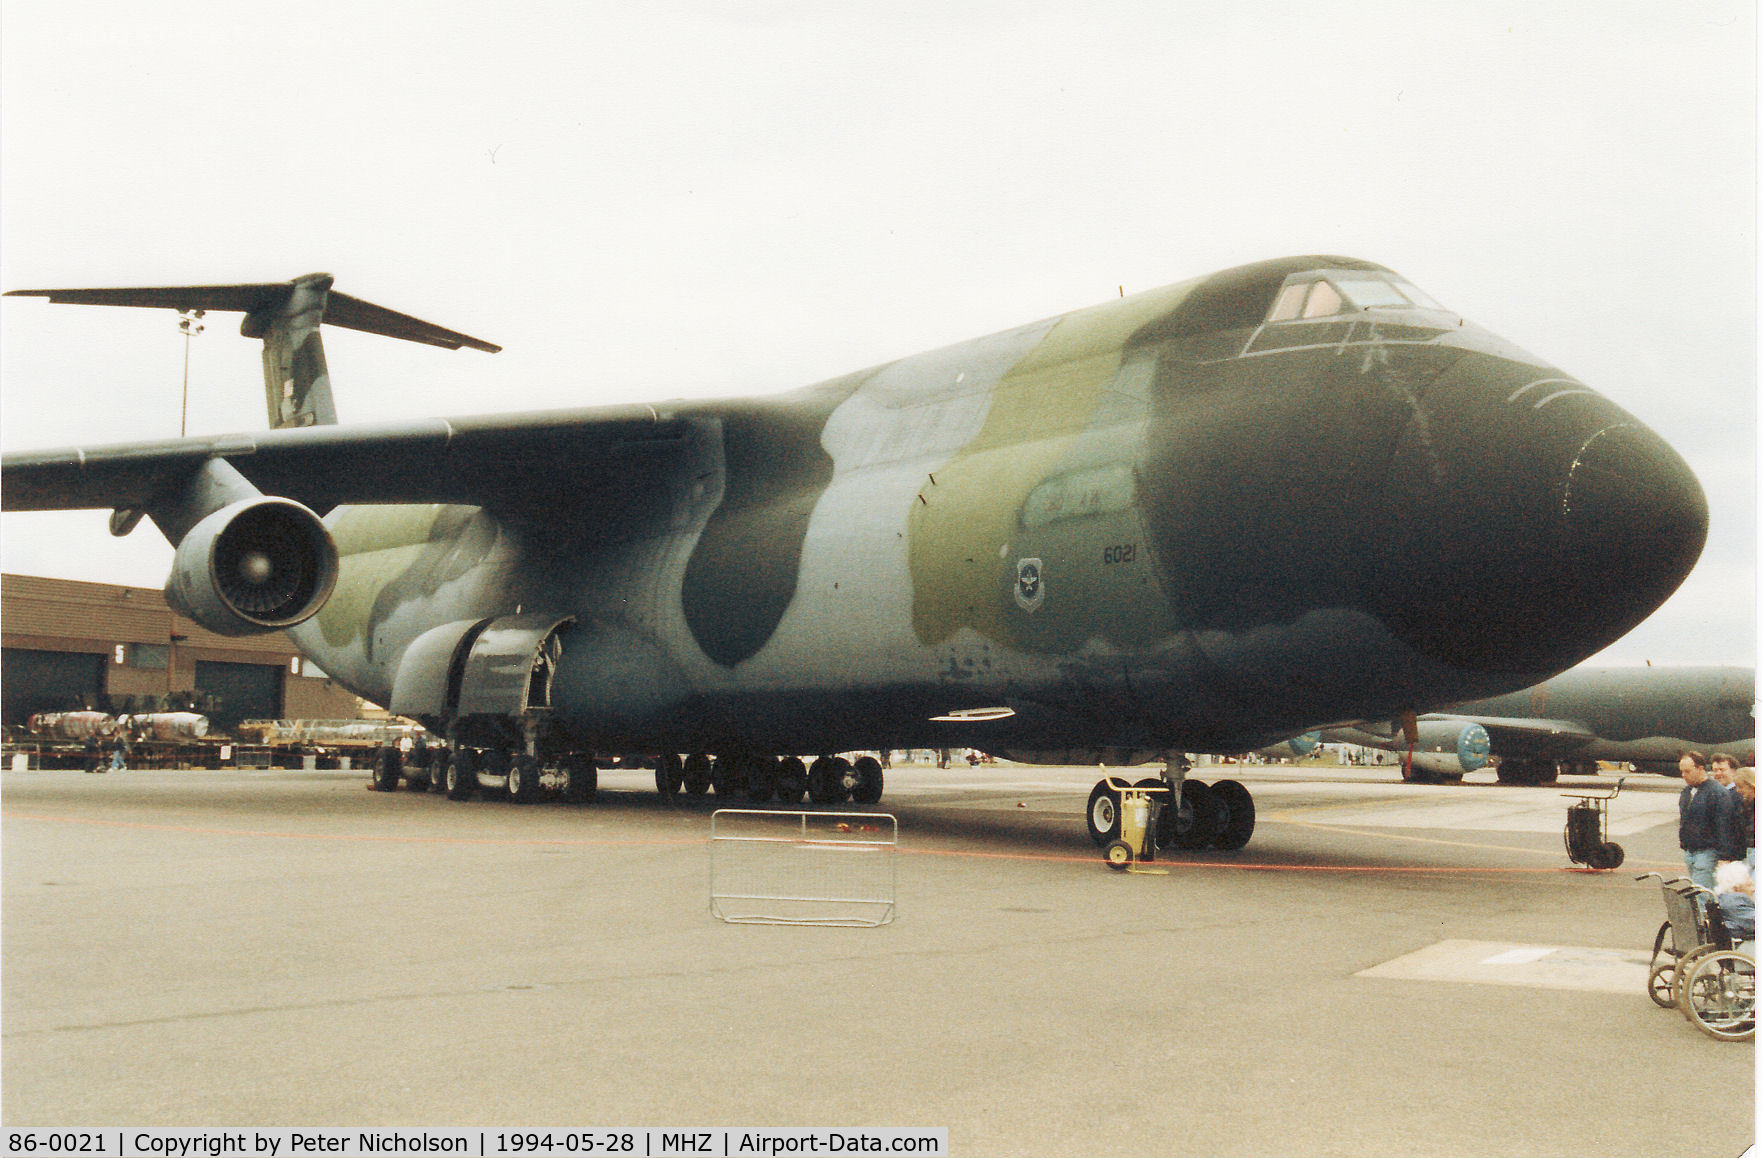 86-0021, Lockheed C-5(B)M Super Galaxy C/N 500-107, C-5B Galaxy of 60th Airlift Wing based at Travis AFB on display at the 1994 RAF Mildenhall Air Fete.